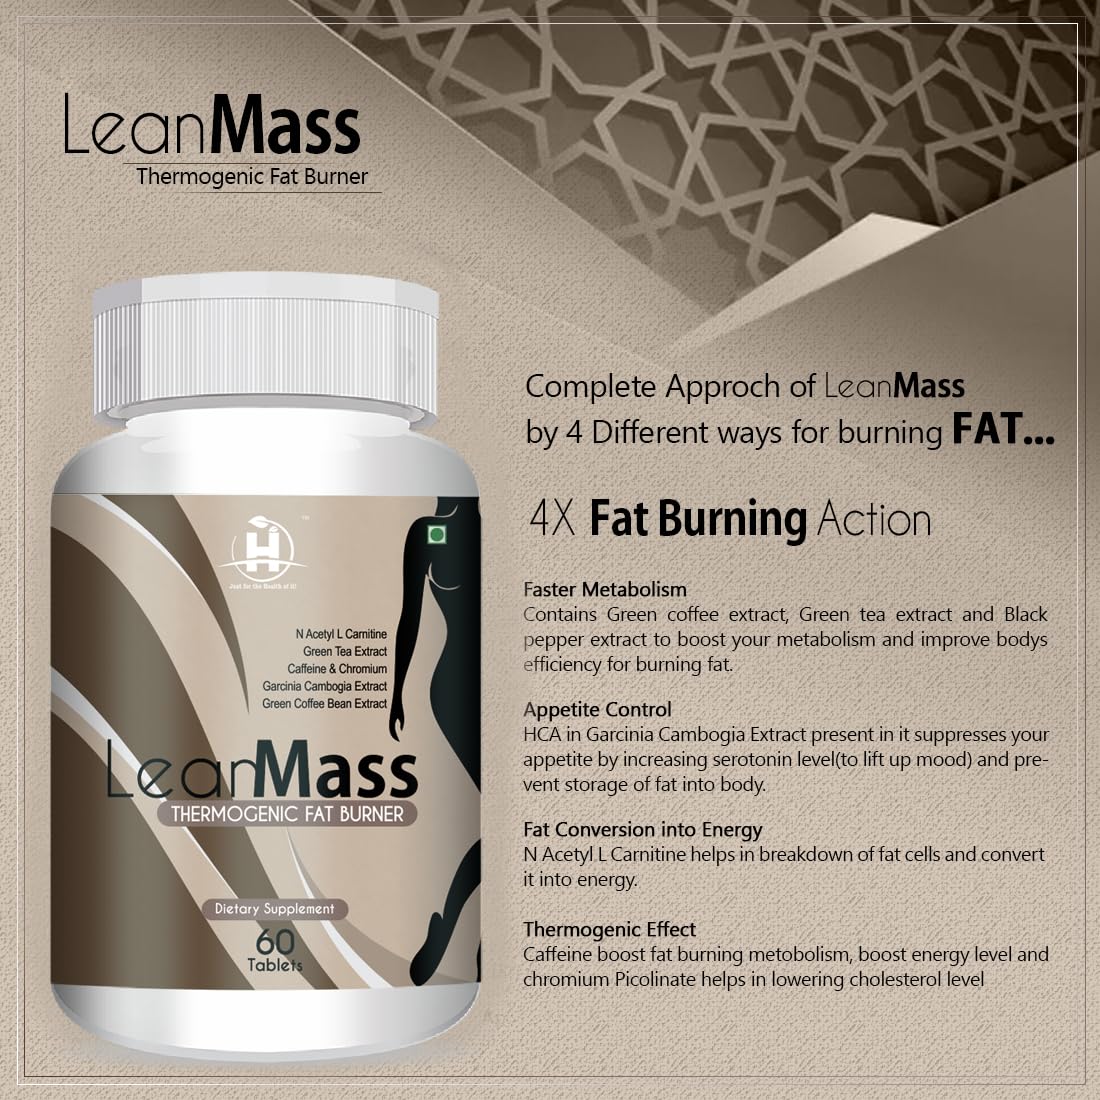 Healthy Nutrition Lean Mass Fat Burner for Men & Women with Green tea Extract, Garcinia Cambogia, Grromium | Weight & Fat loss supplement - 60 Tablets